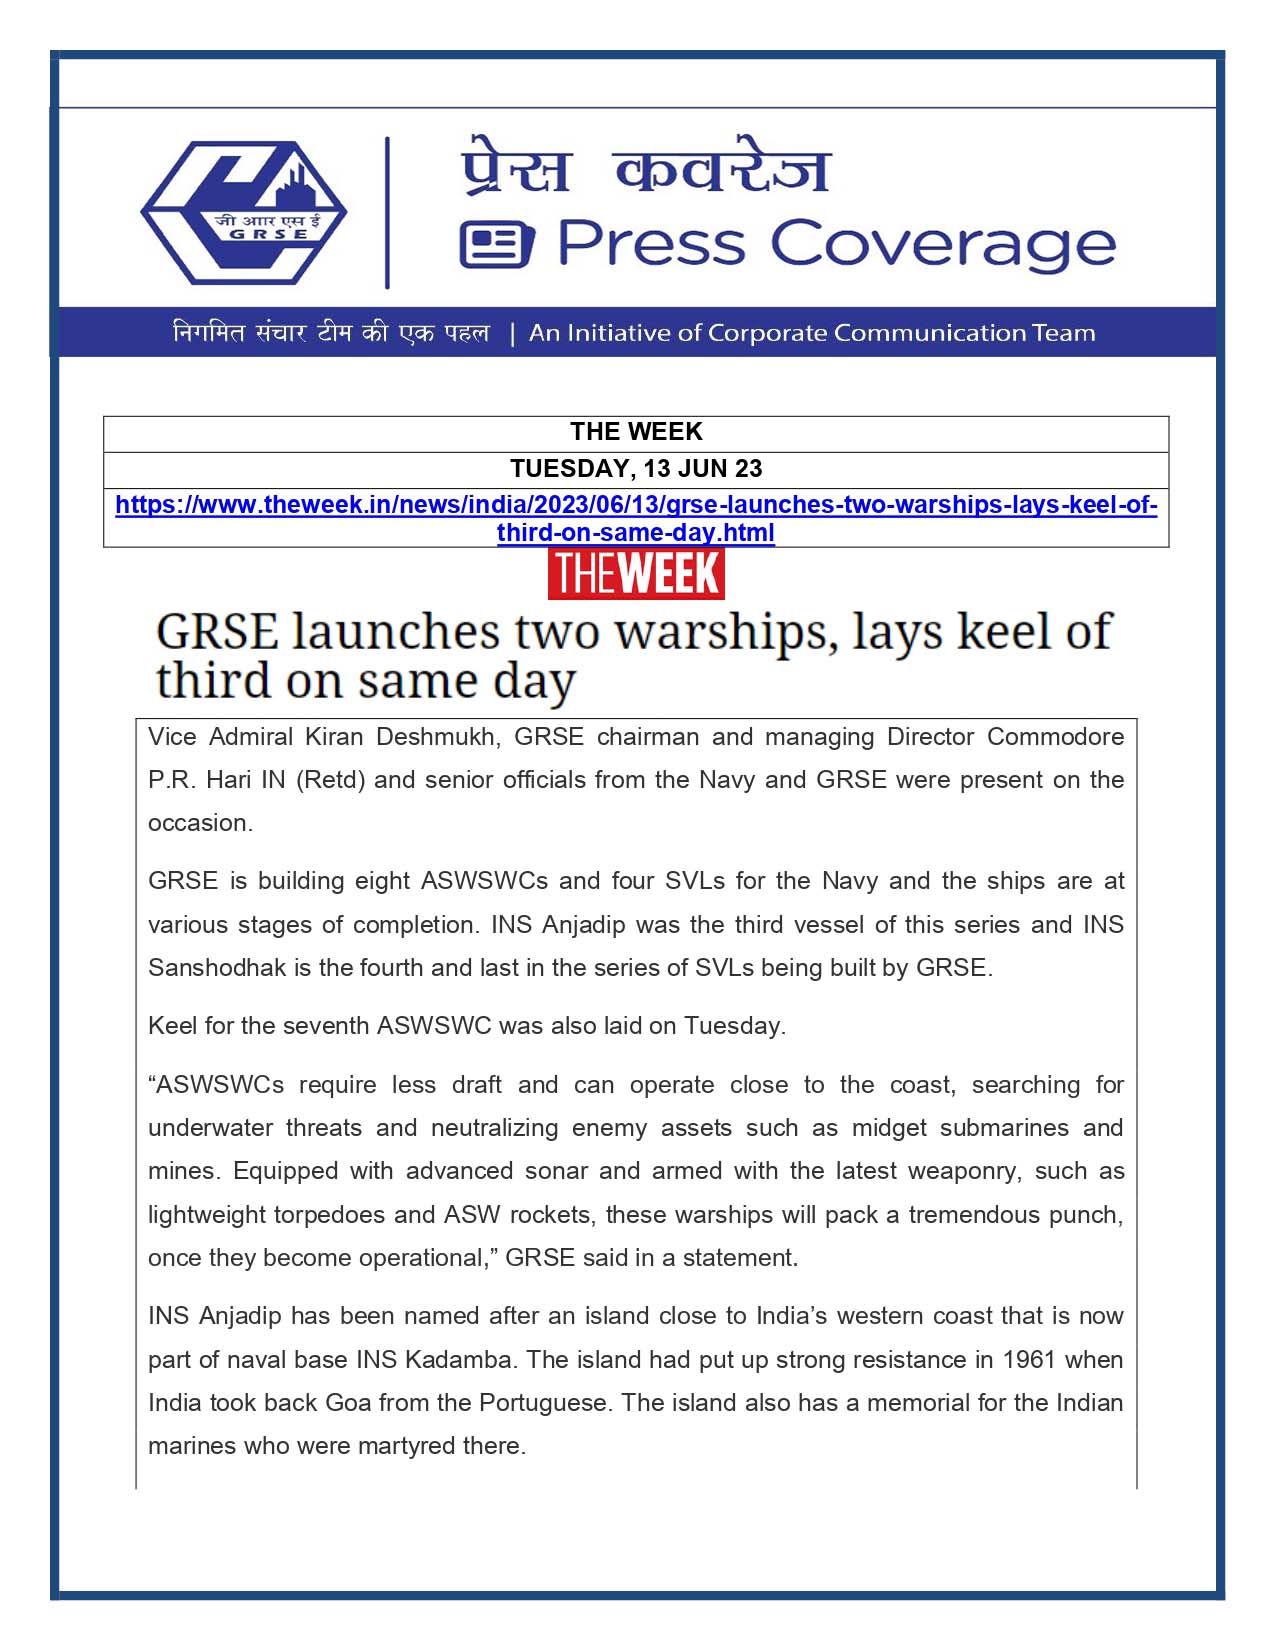 GRSE launches two warships, lays keel of third on same day